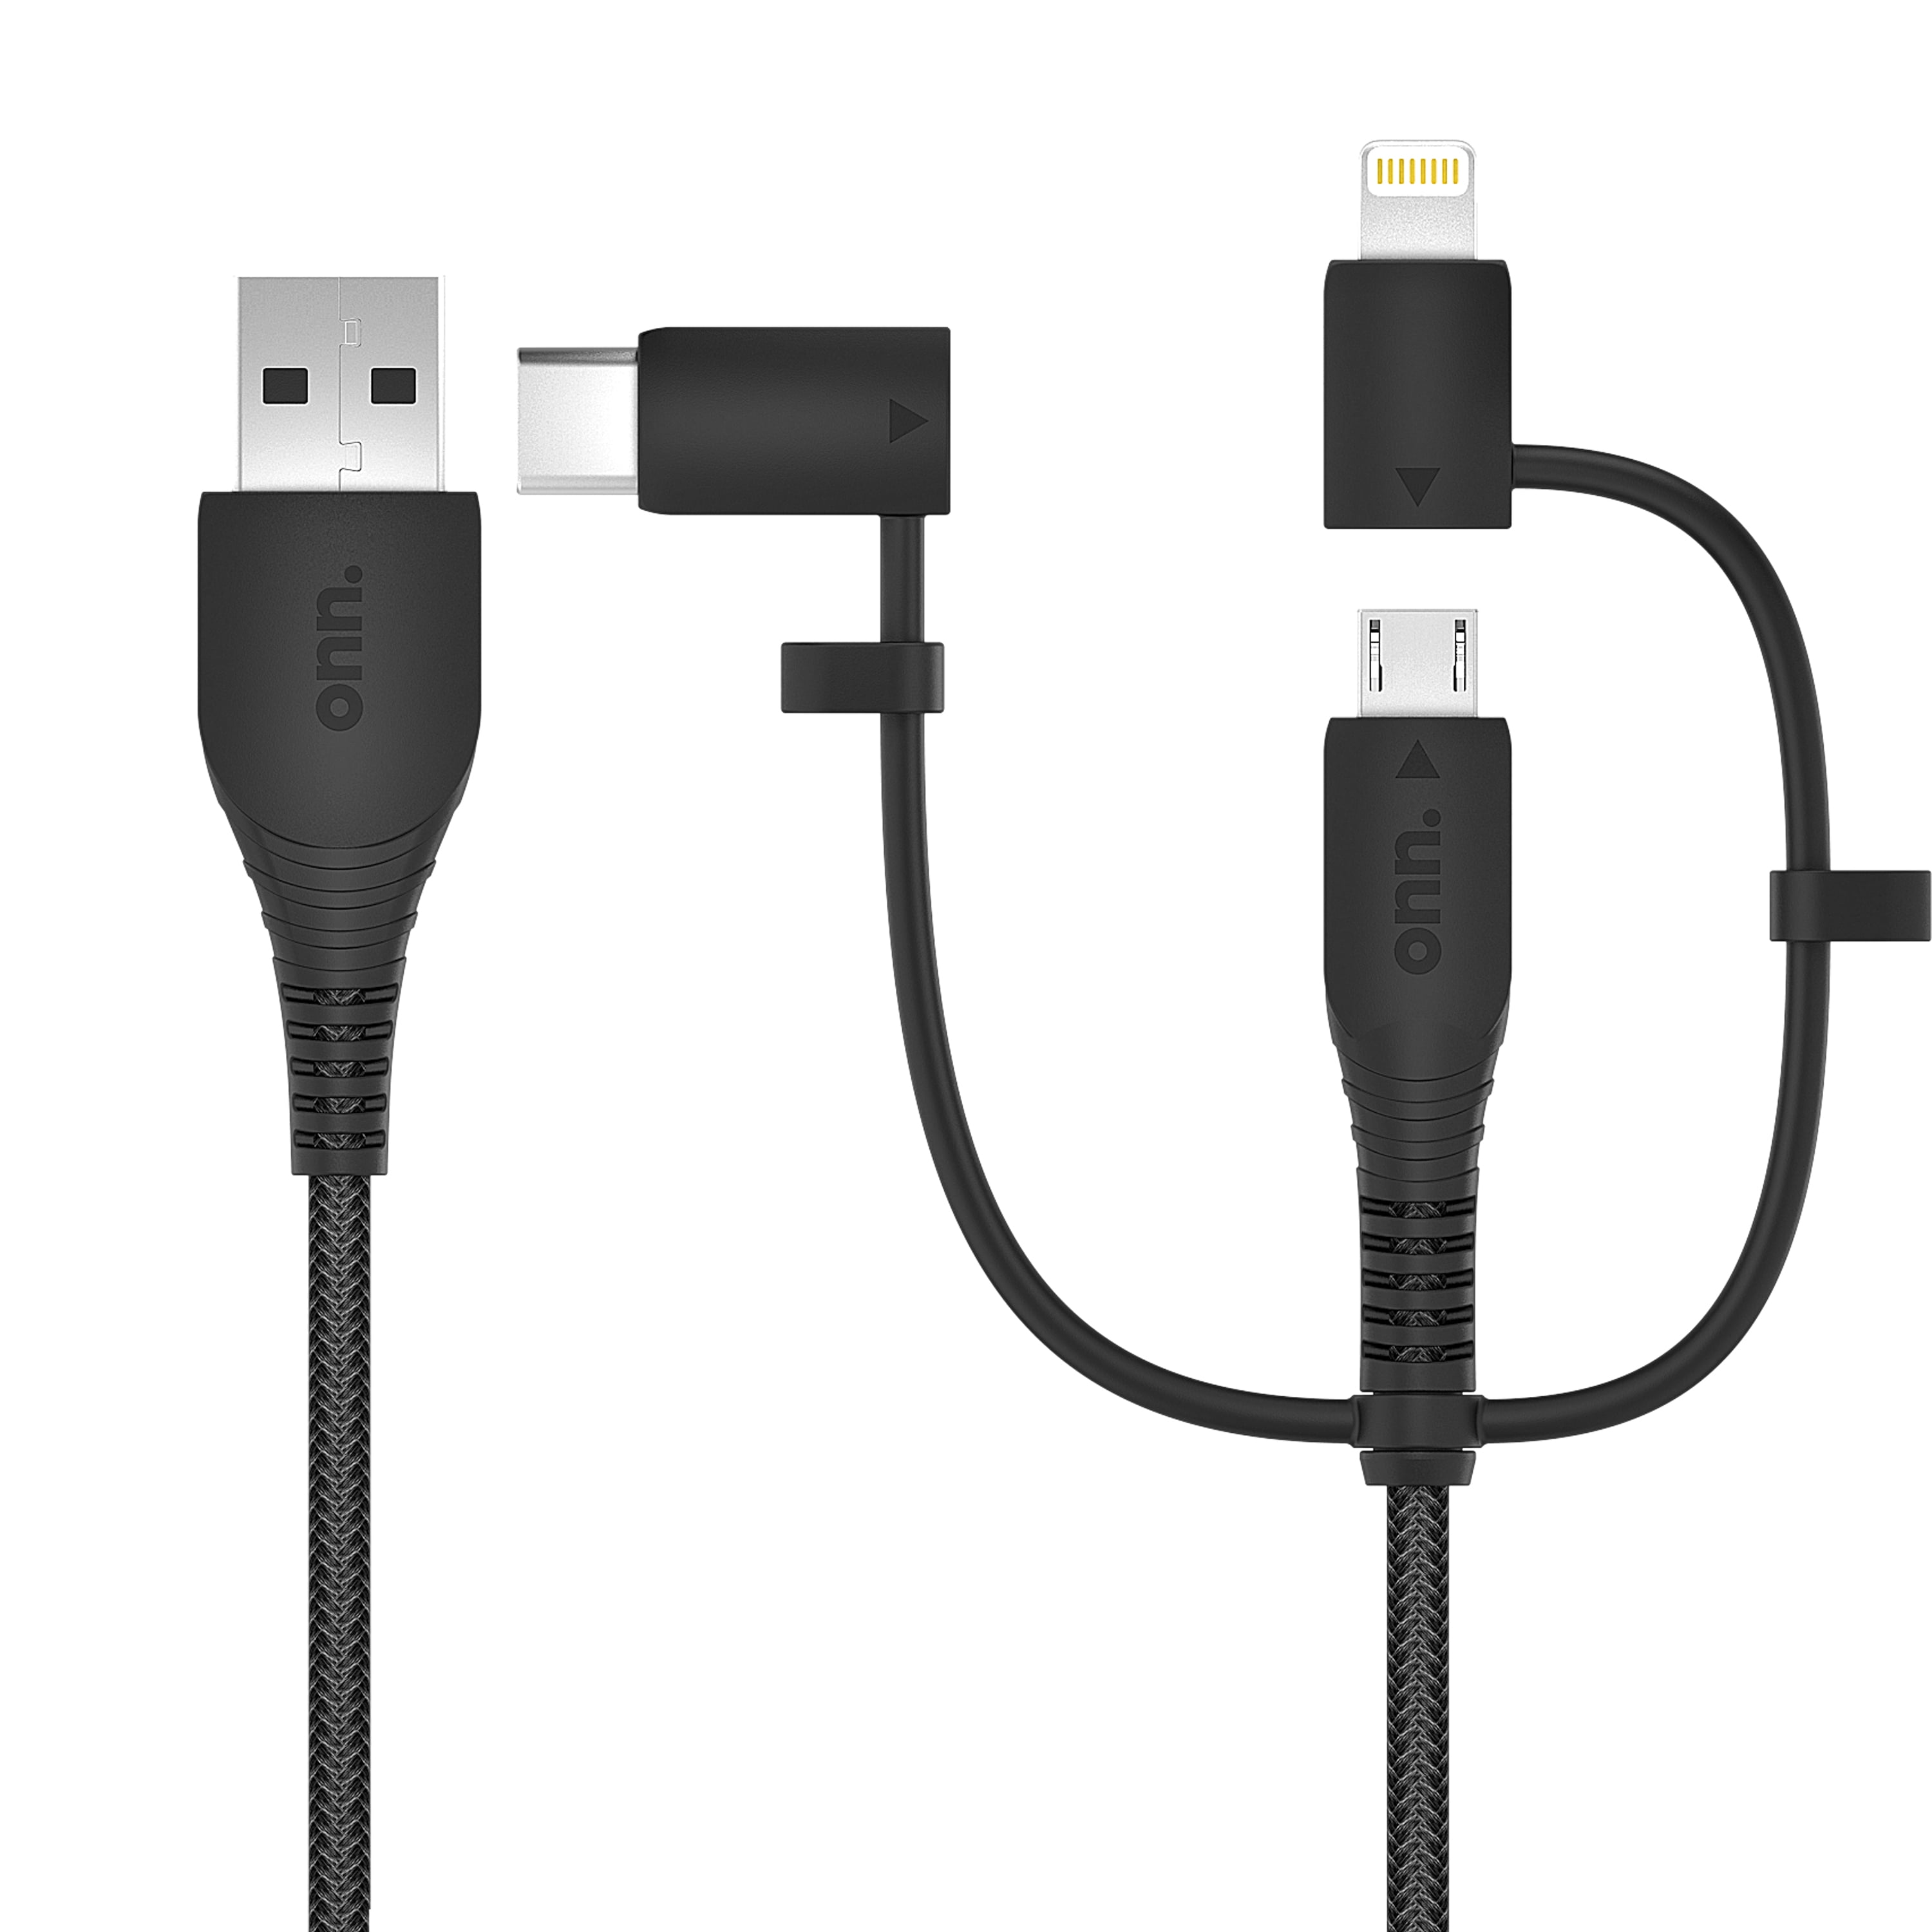 Sea Marine Whales Mammals 3 in 1 USB Multi Function Charging Cable Data Transmission USB Cable for Mobile Phones and Tablets Compatible with Various Models with Storage Bag 